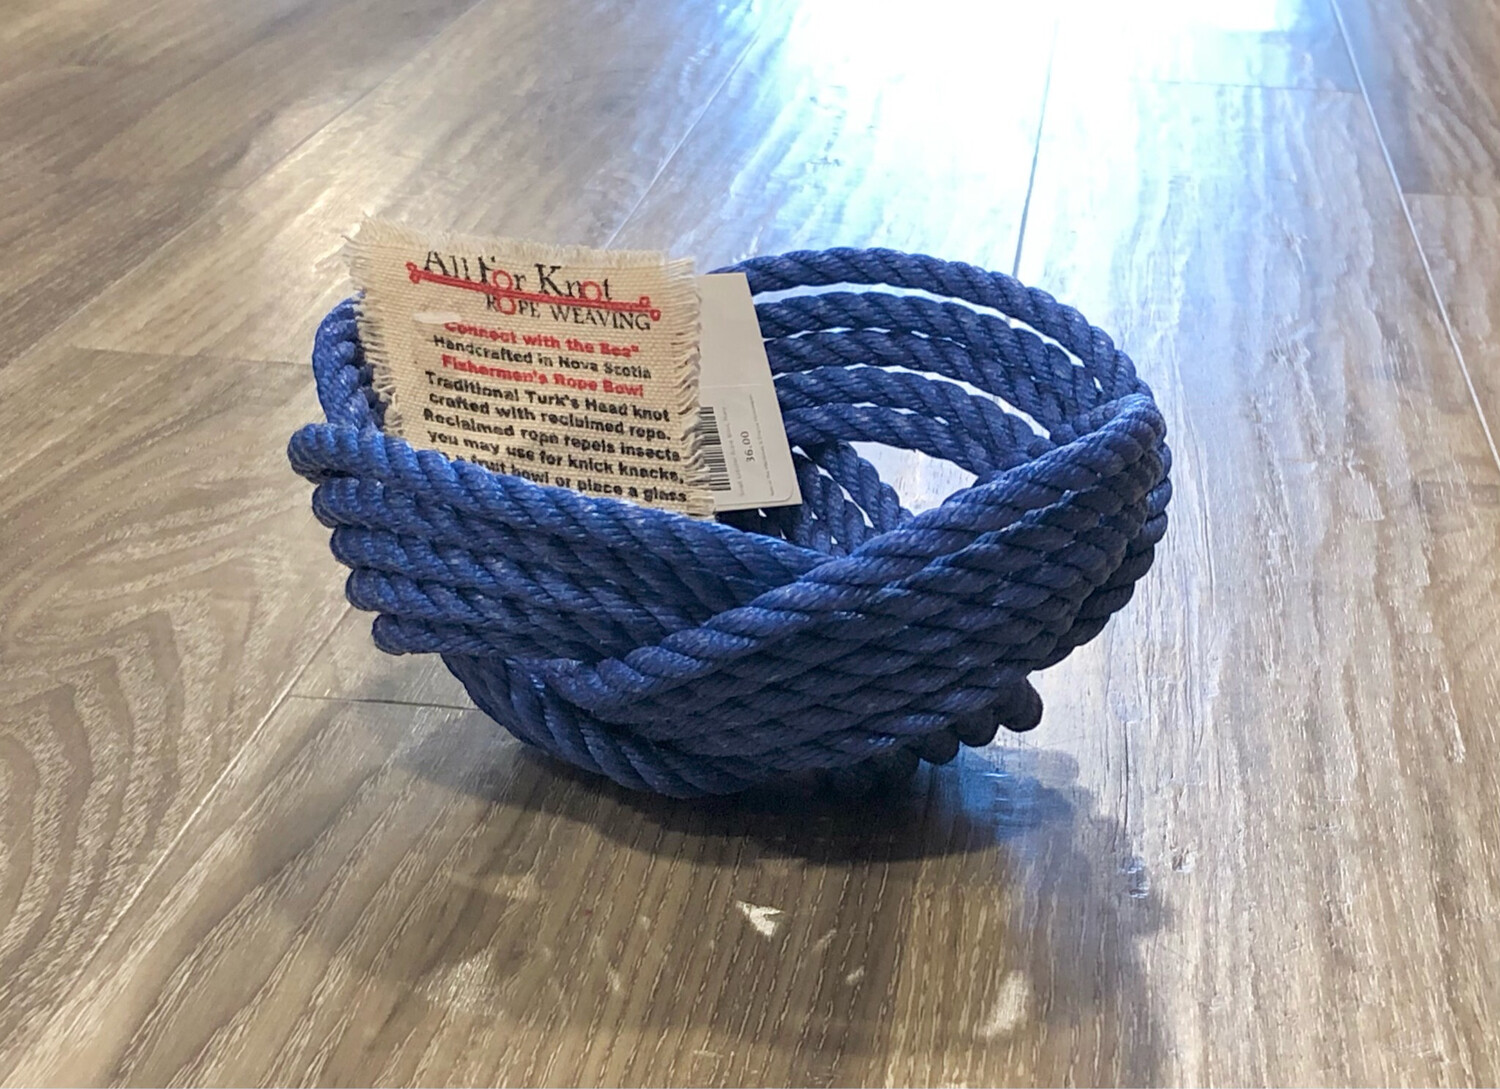 Small Lobster Rope Bowl, Navy - All for Knot